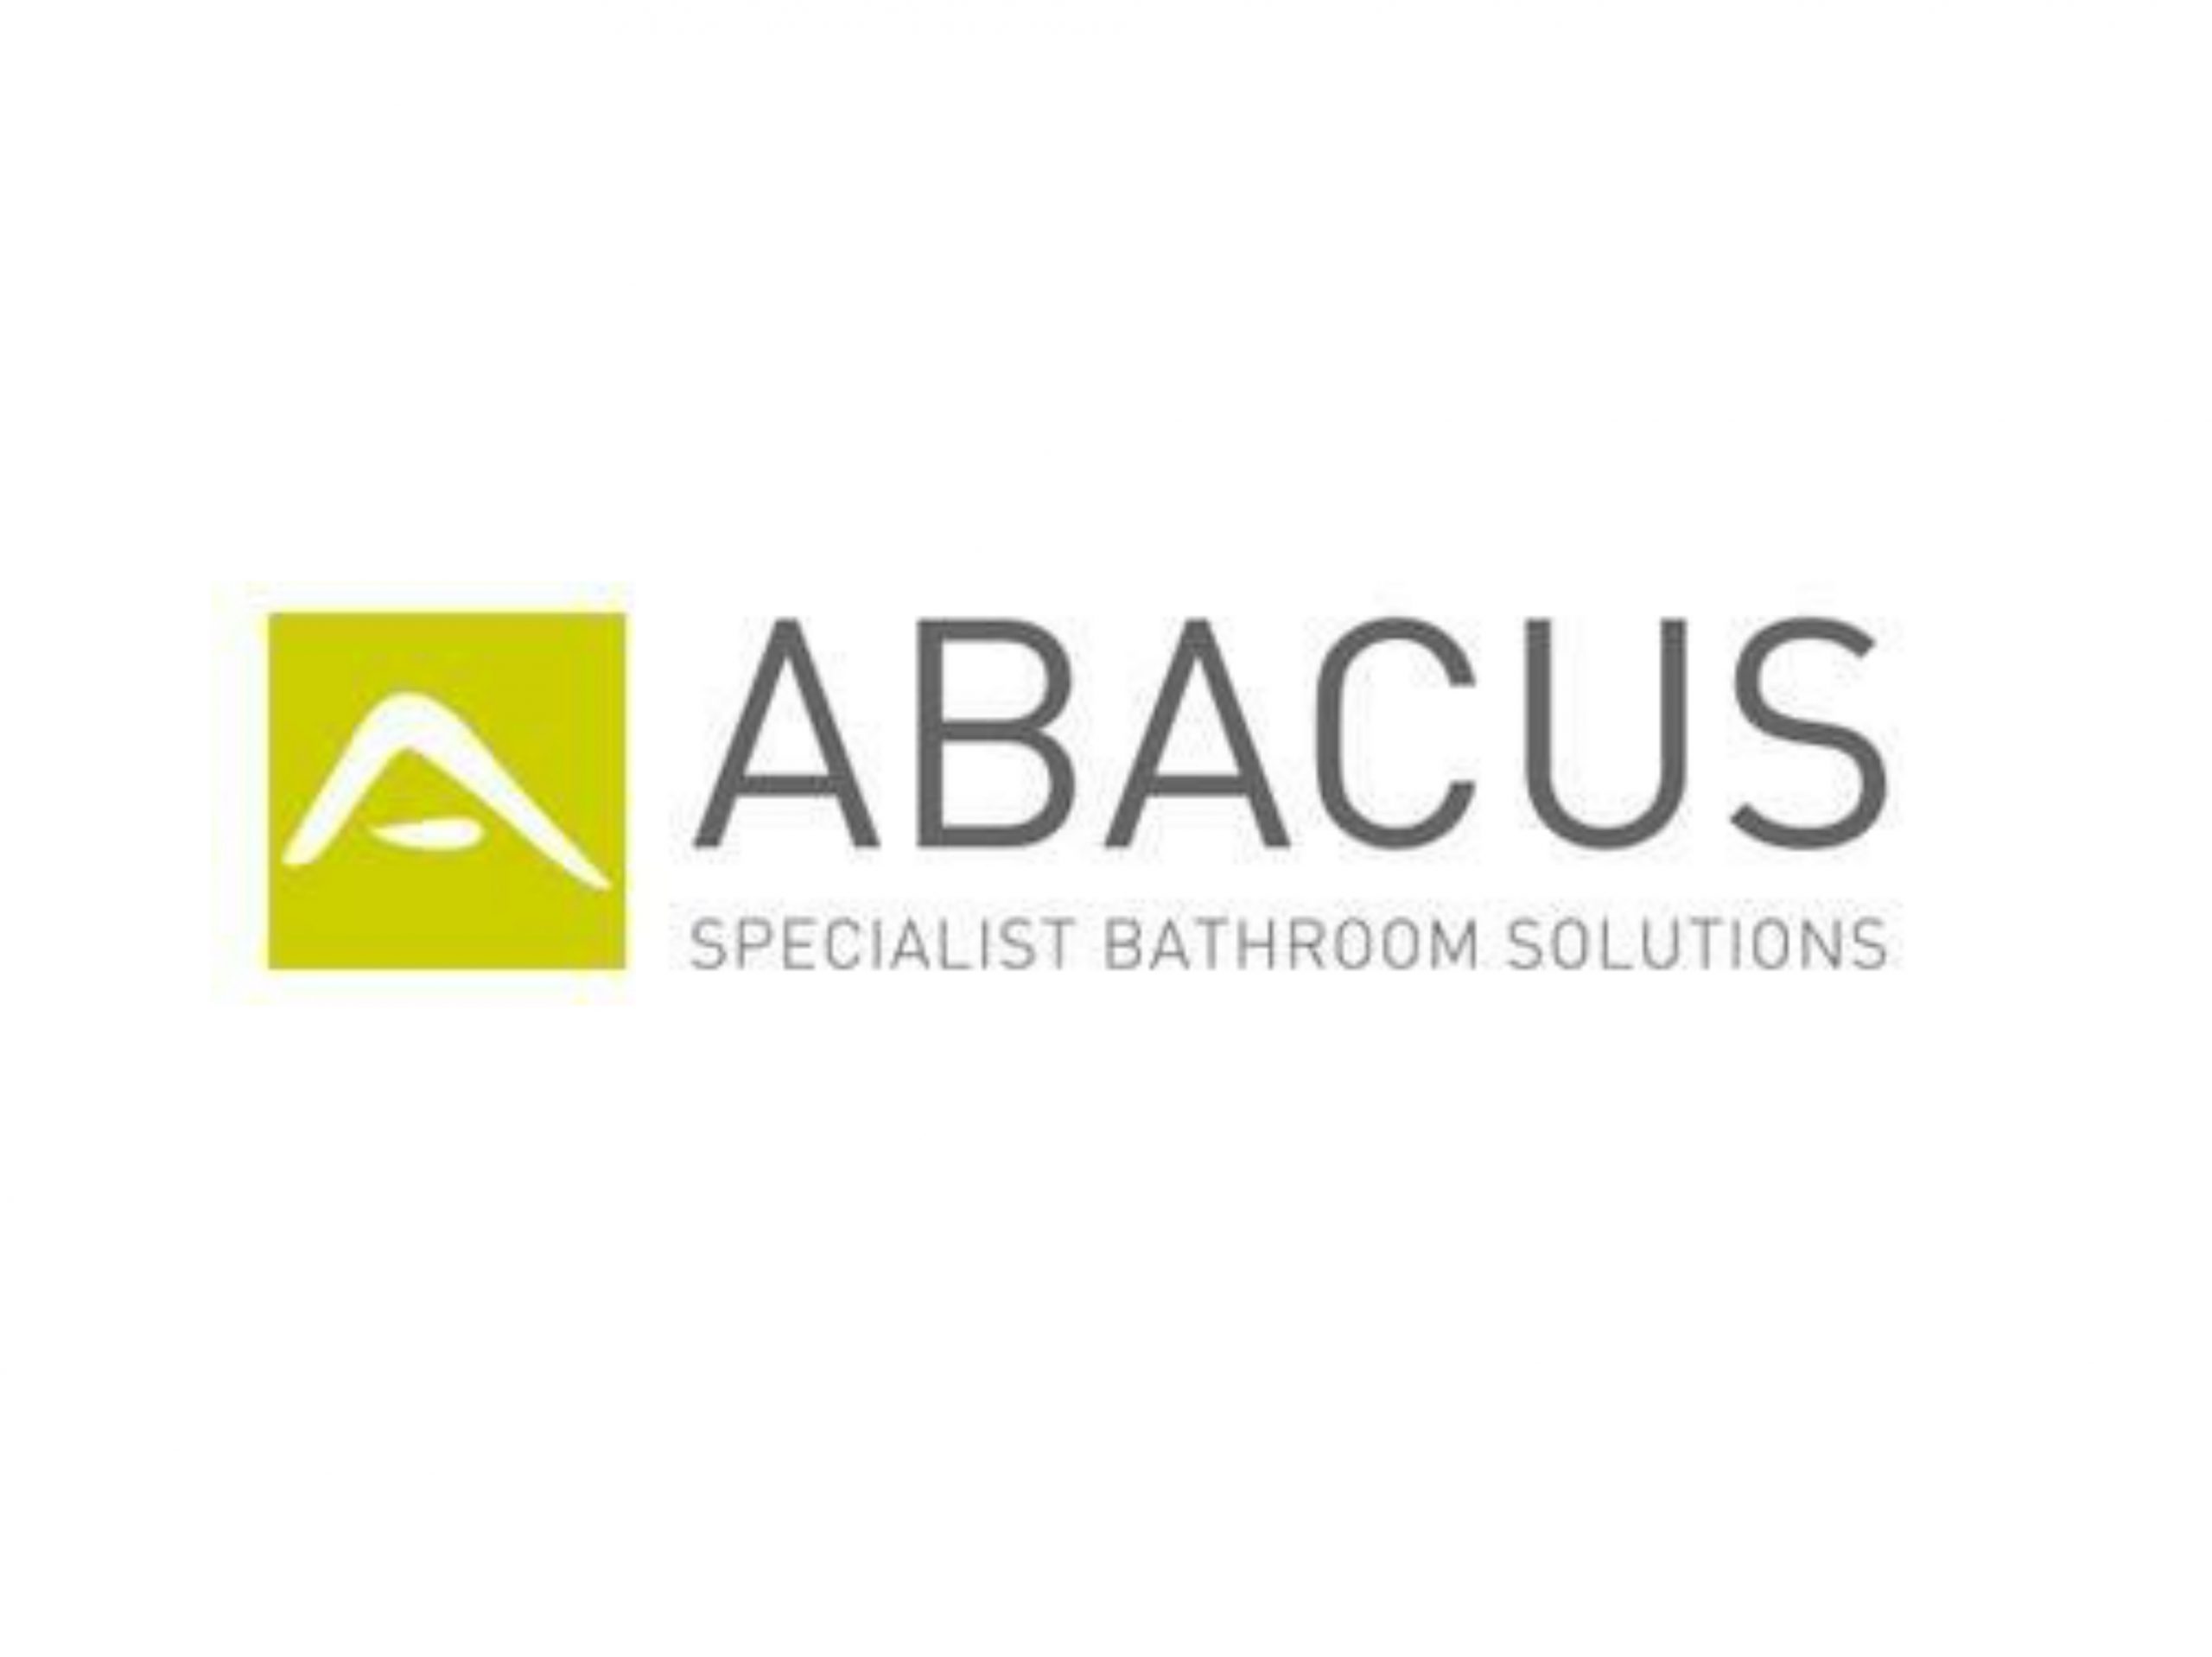 Abacus Bath Demonstration Vehicles prove Popular for Safe OT Outdoor Assessments